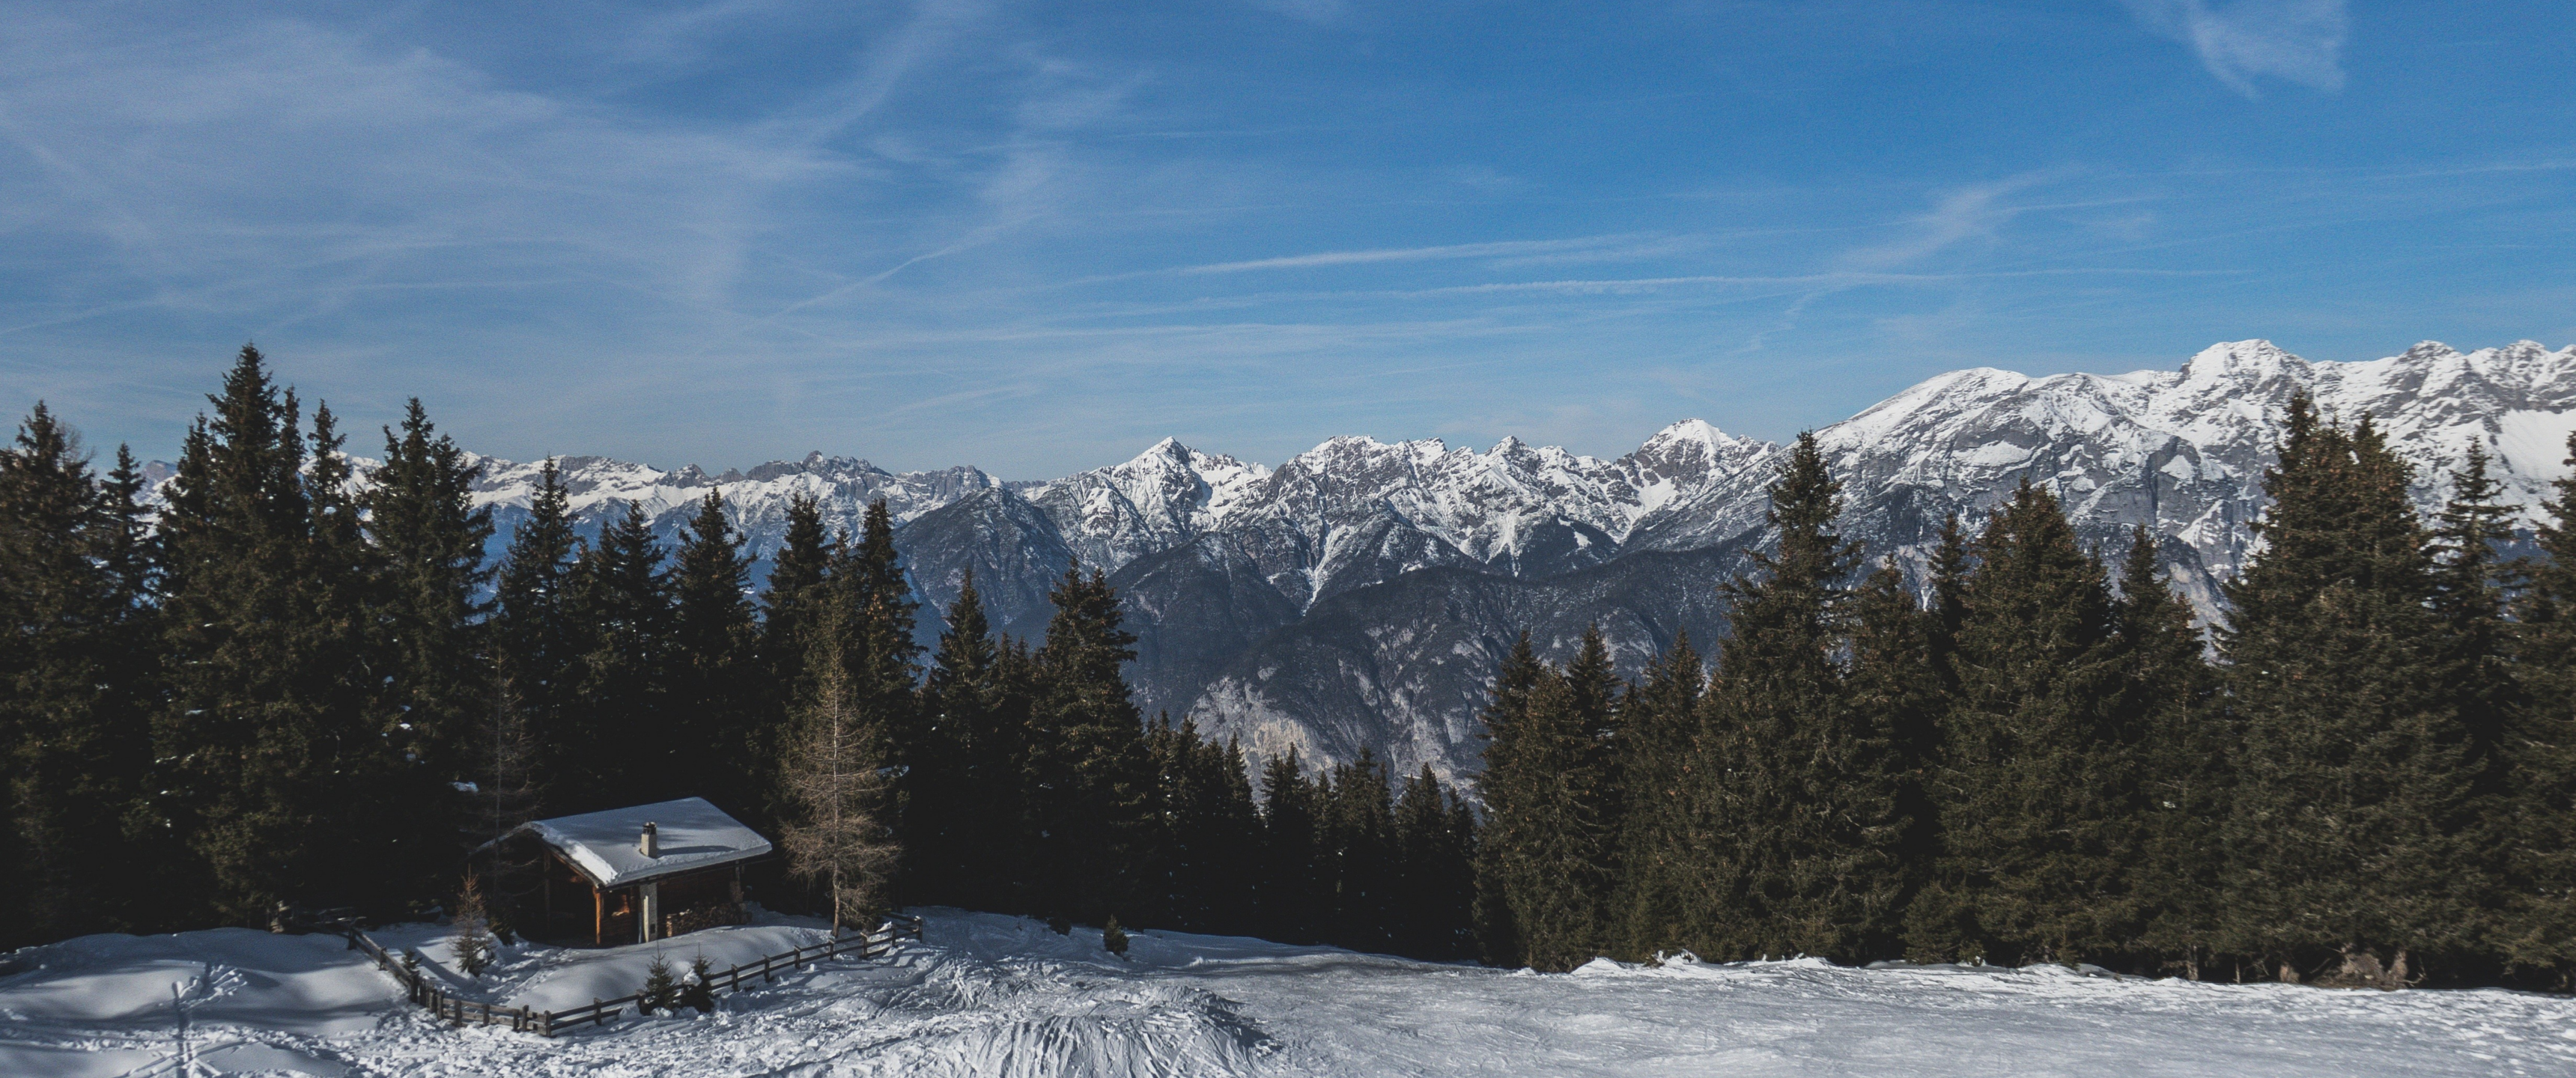 General 3440x1440 ultrawide snow mountains forest landscape